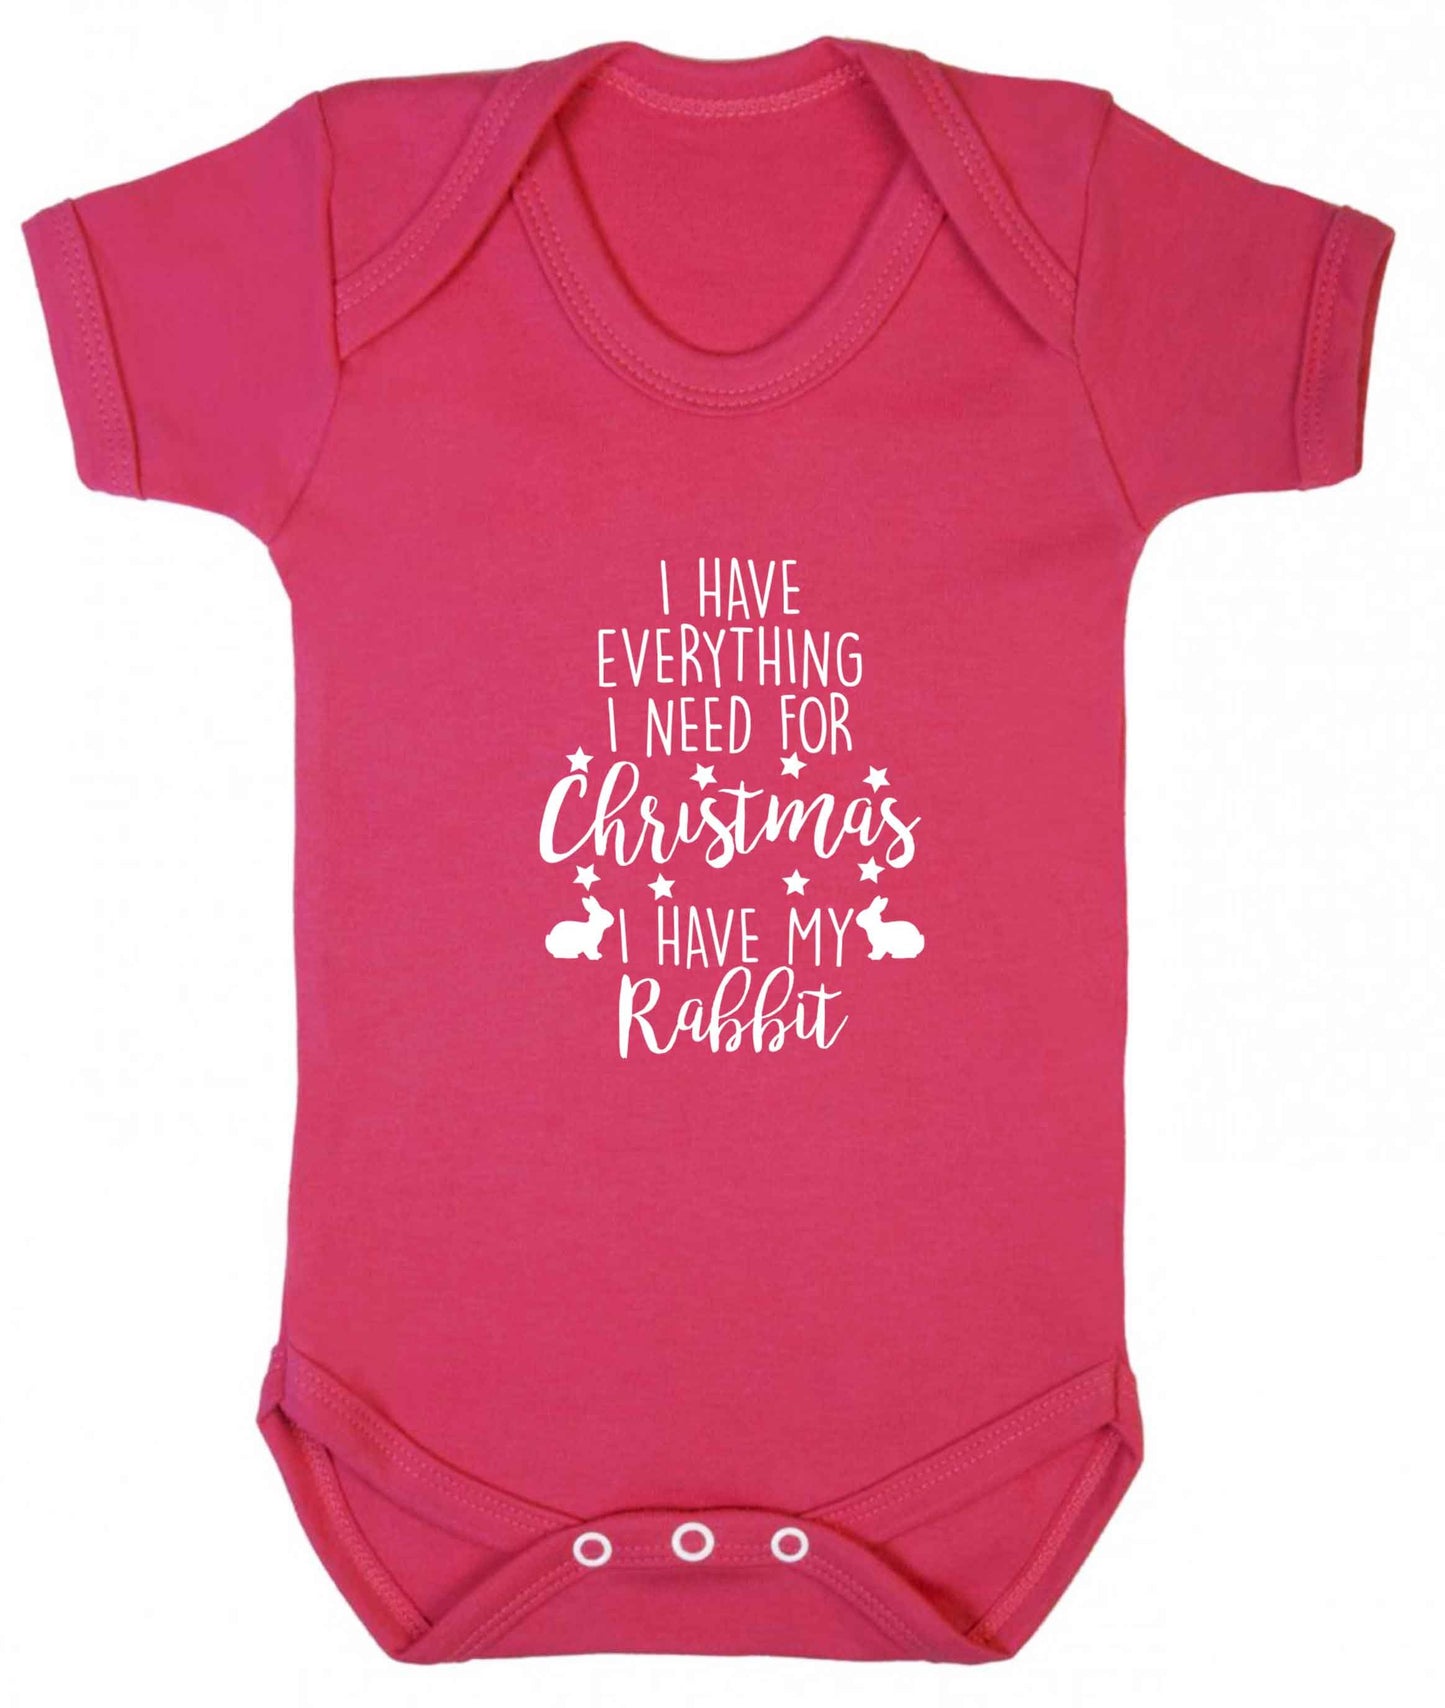 I have everything I need for Christmas I have my rabbit baby vest dark pink 18-24 months